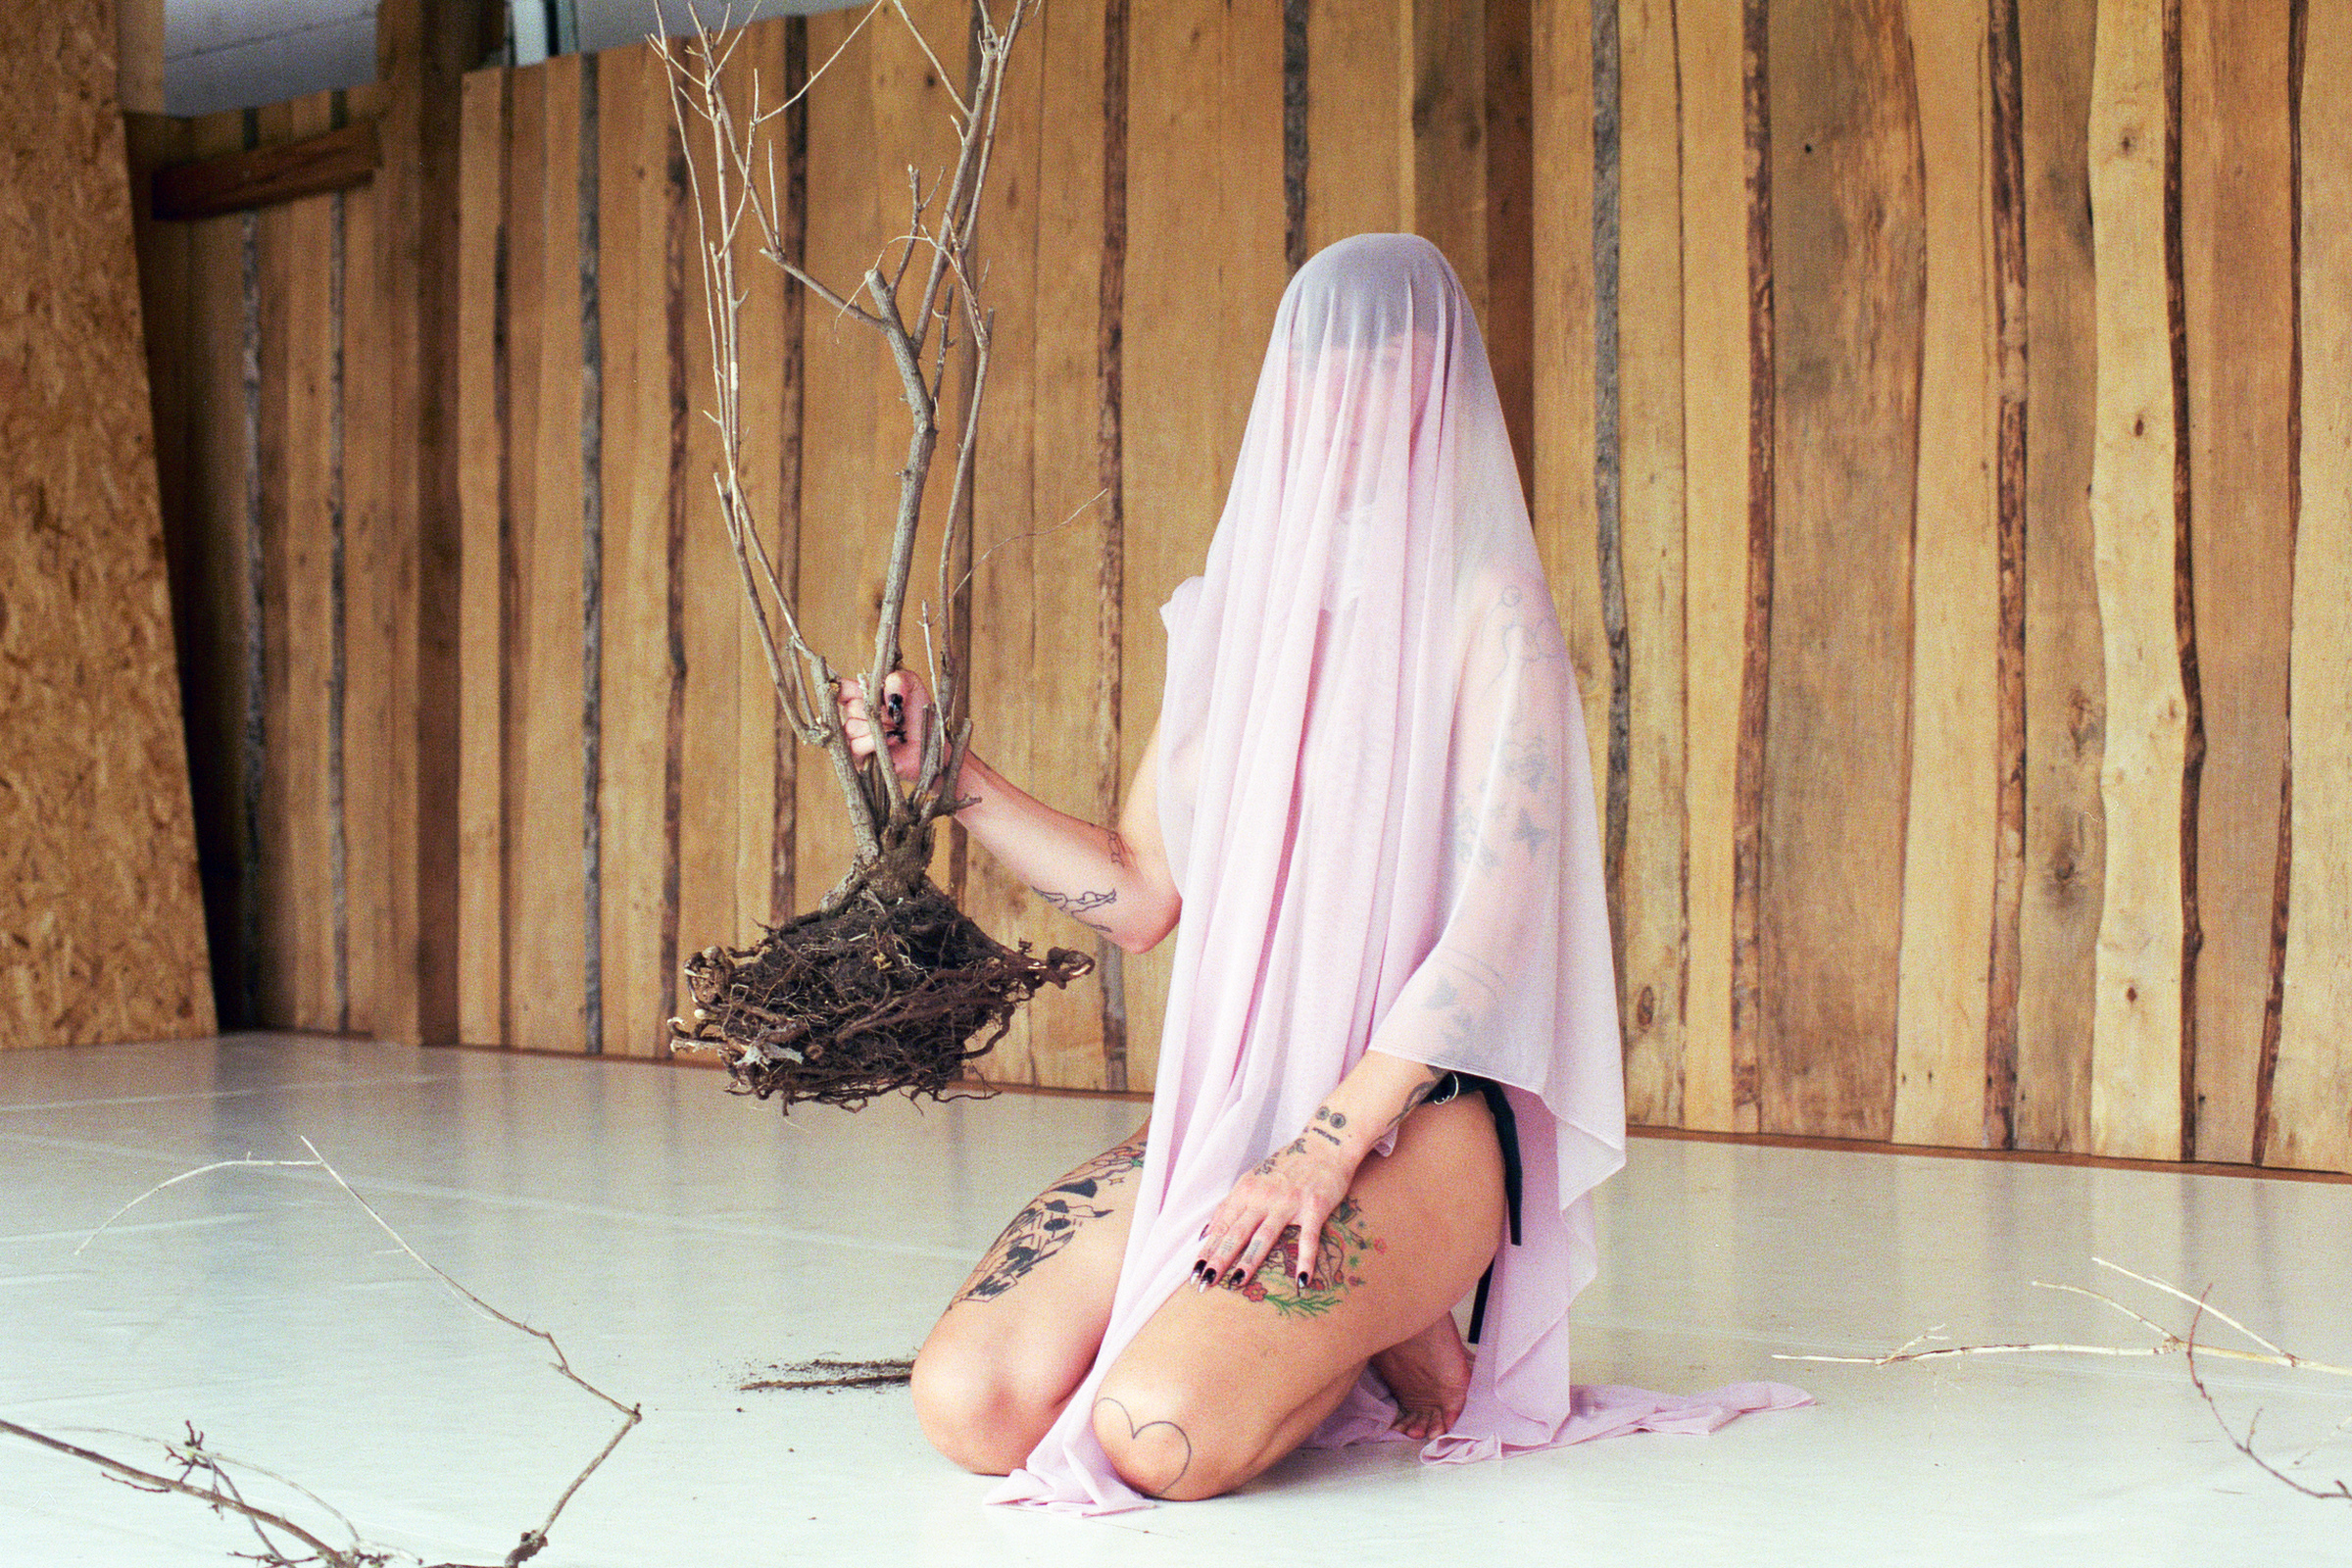 Mary-Dora Bloch-Hansen is sitting on their knees on a white floor of a studio space with a wooden wall behind them. Placed over their head is a light pink, mesh sheet that drapes down and covers their upper body. Their legs are bare, showing various tattoos. To their right side, they are holding up a bunch of long skinny branches that are still attached together by the roots.